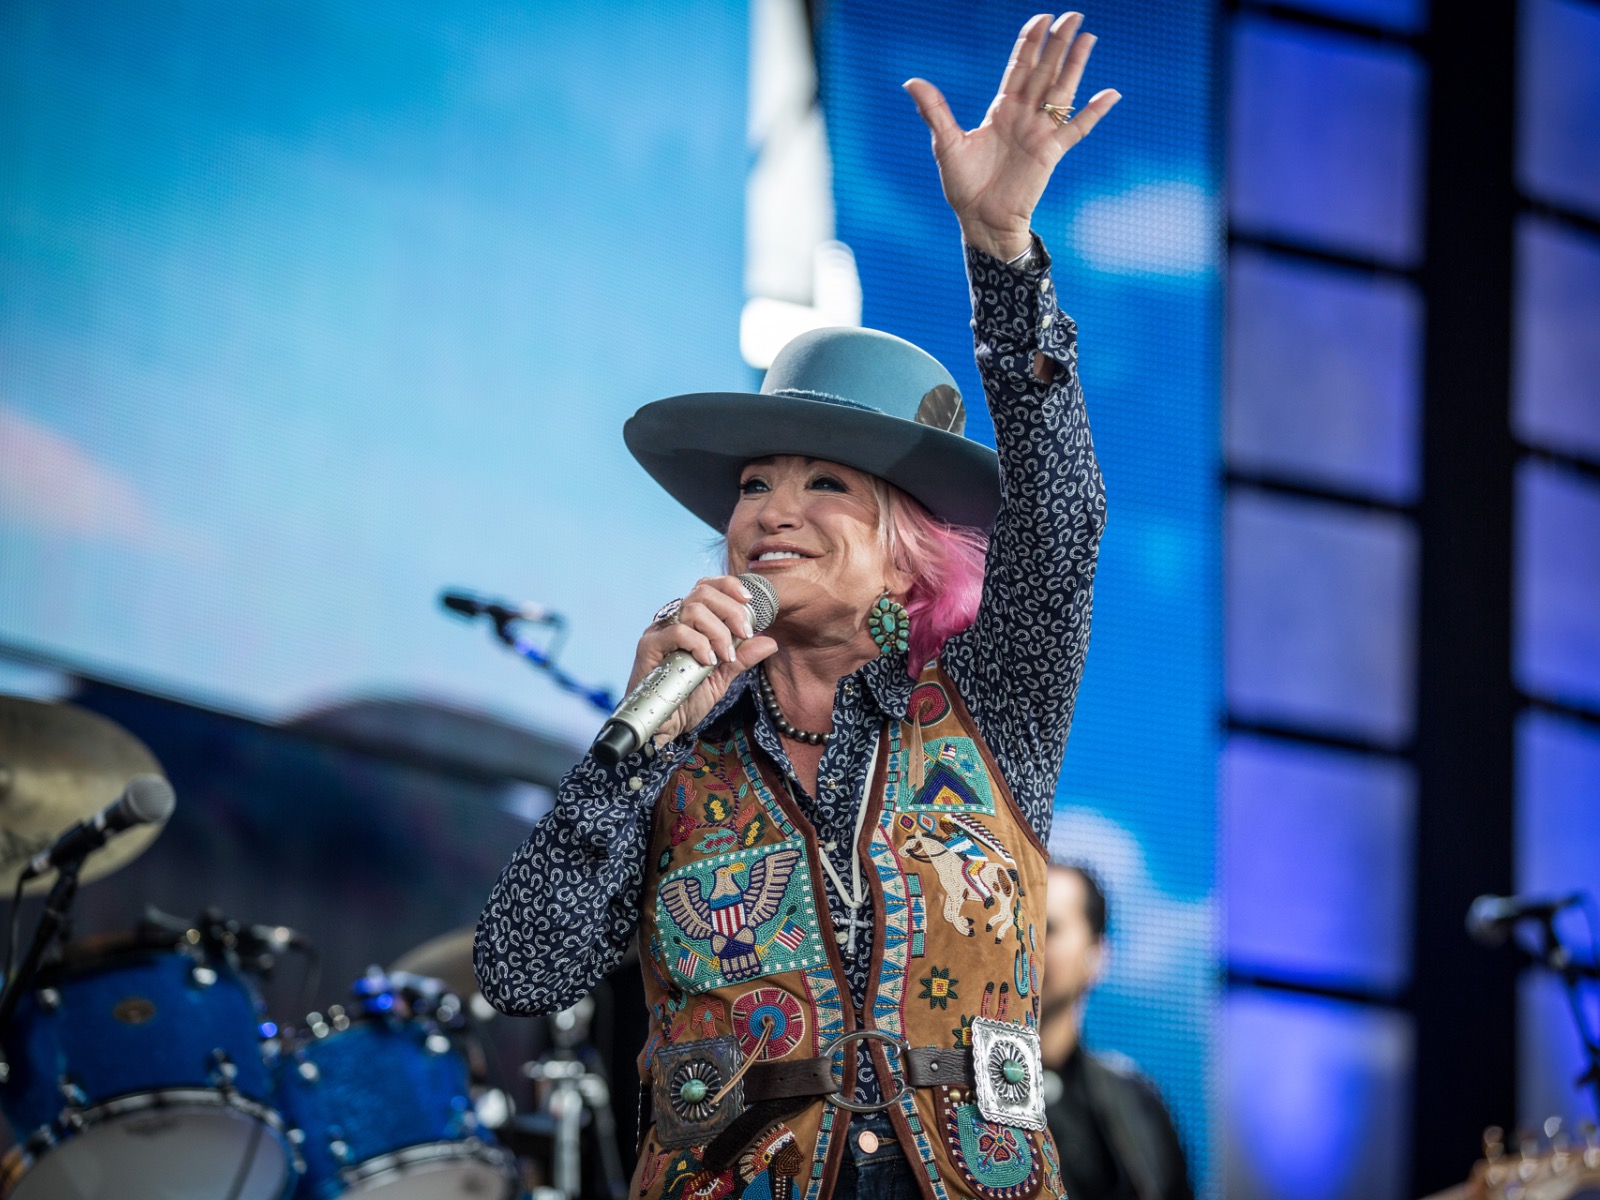 Relive Farm Aid 2019 with these photos OnMilwaukee